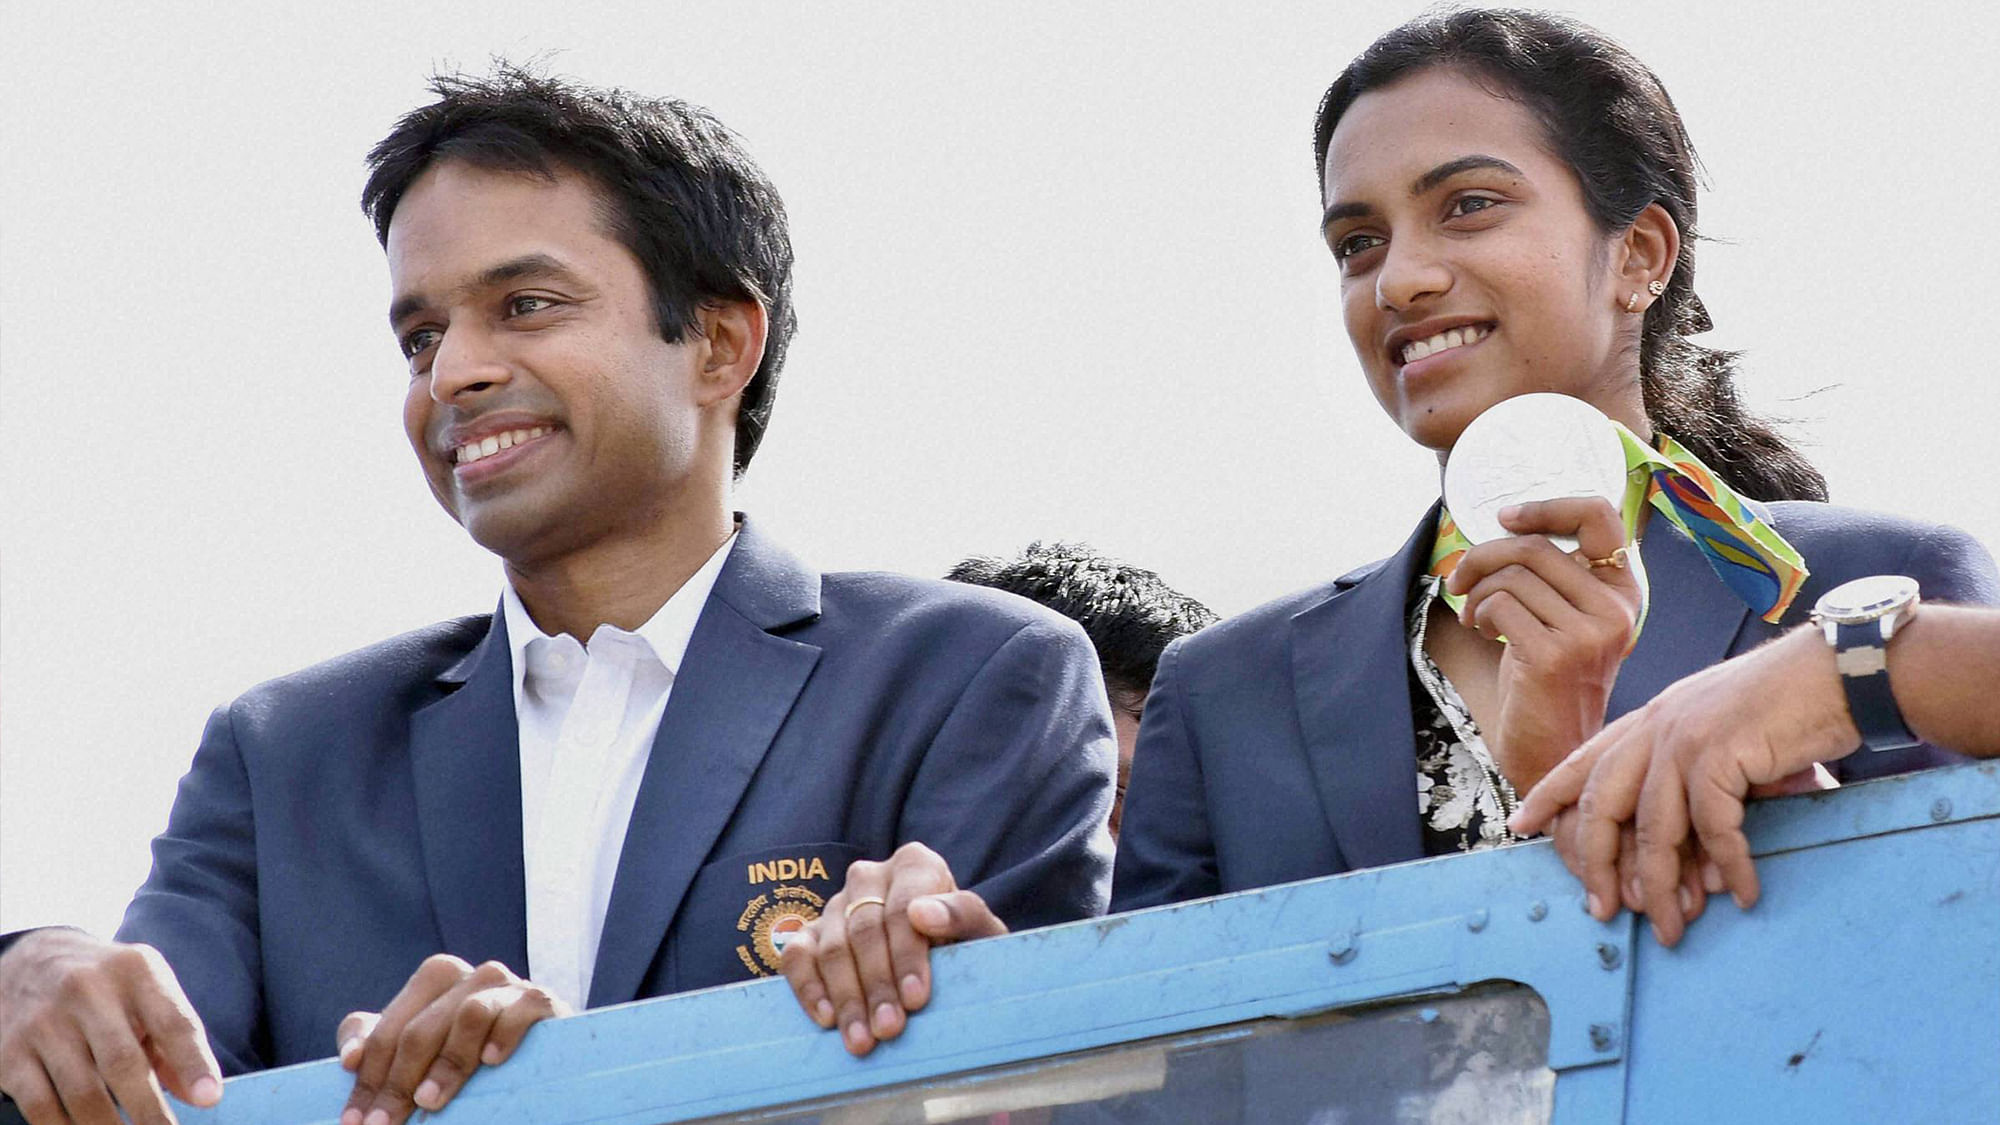 Olympic Silver Medalist P.V.Sindhu with her Coach Gopi Chand flaunts her medal after her arrival at Rajiv Gandhi International Airport in Hyderabad on Monday. (Photo: PTI)